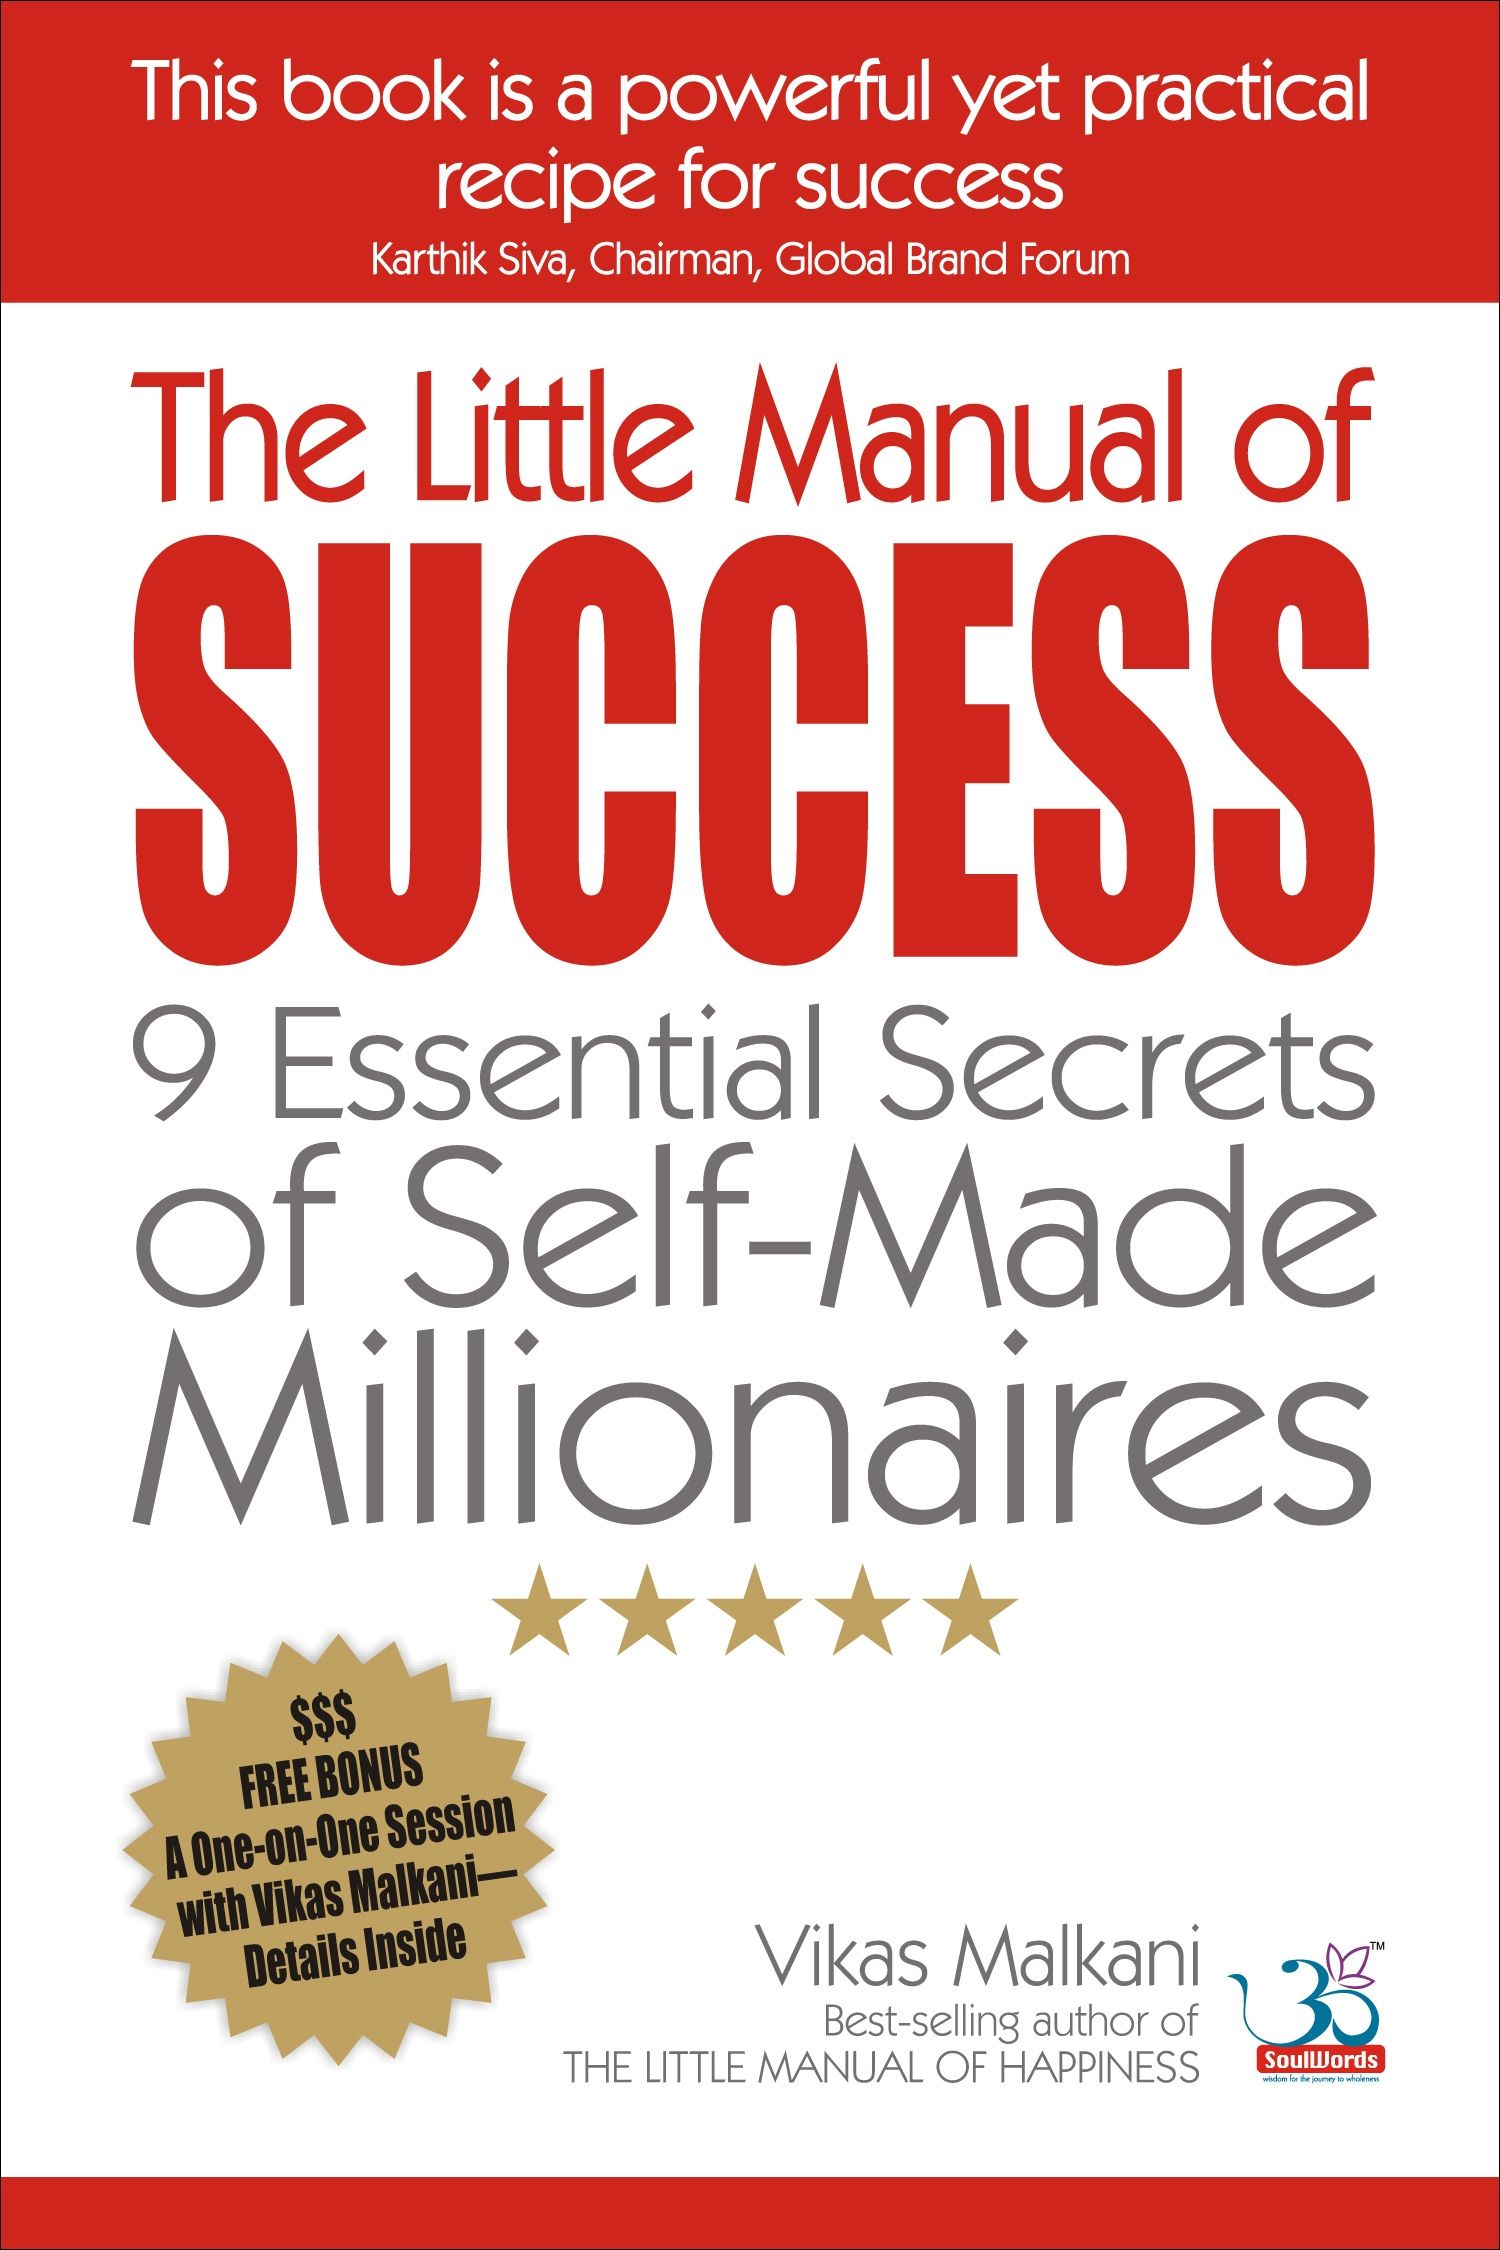 The Little Manual of Success